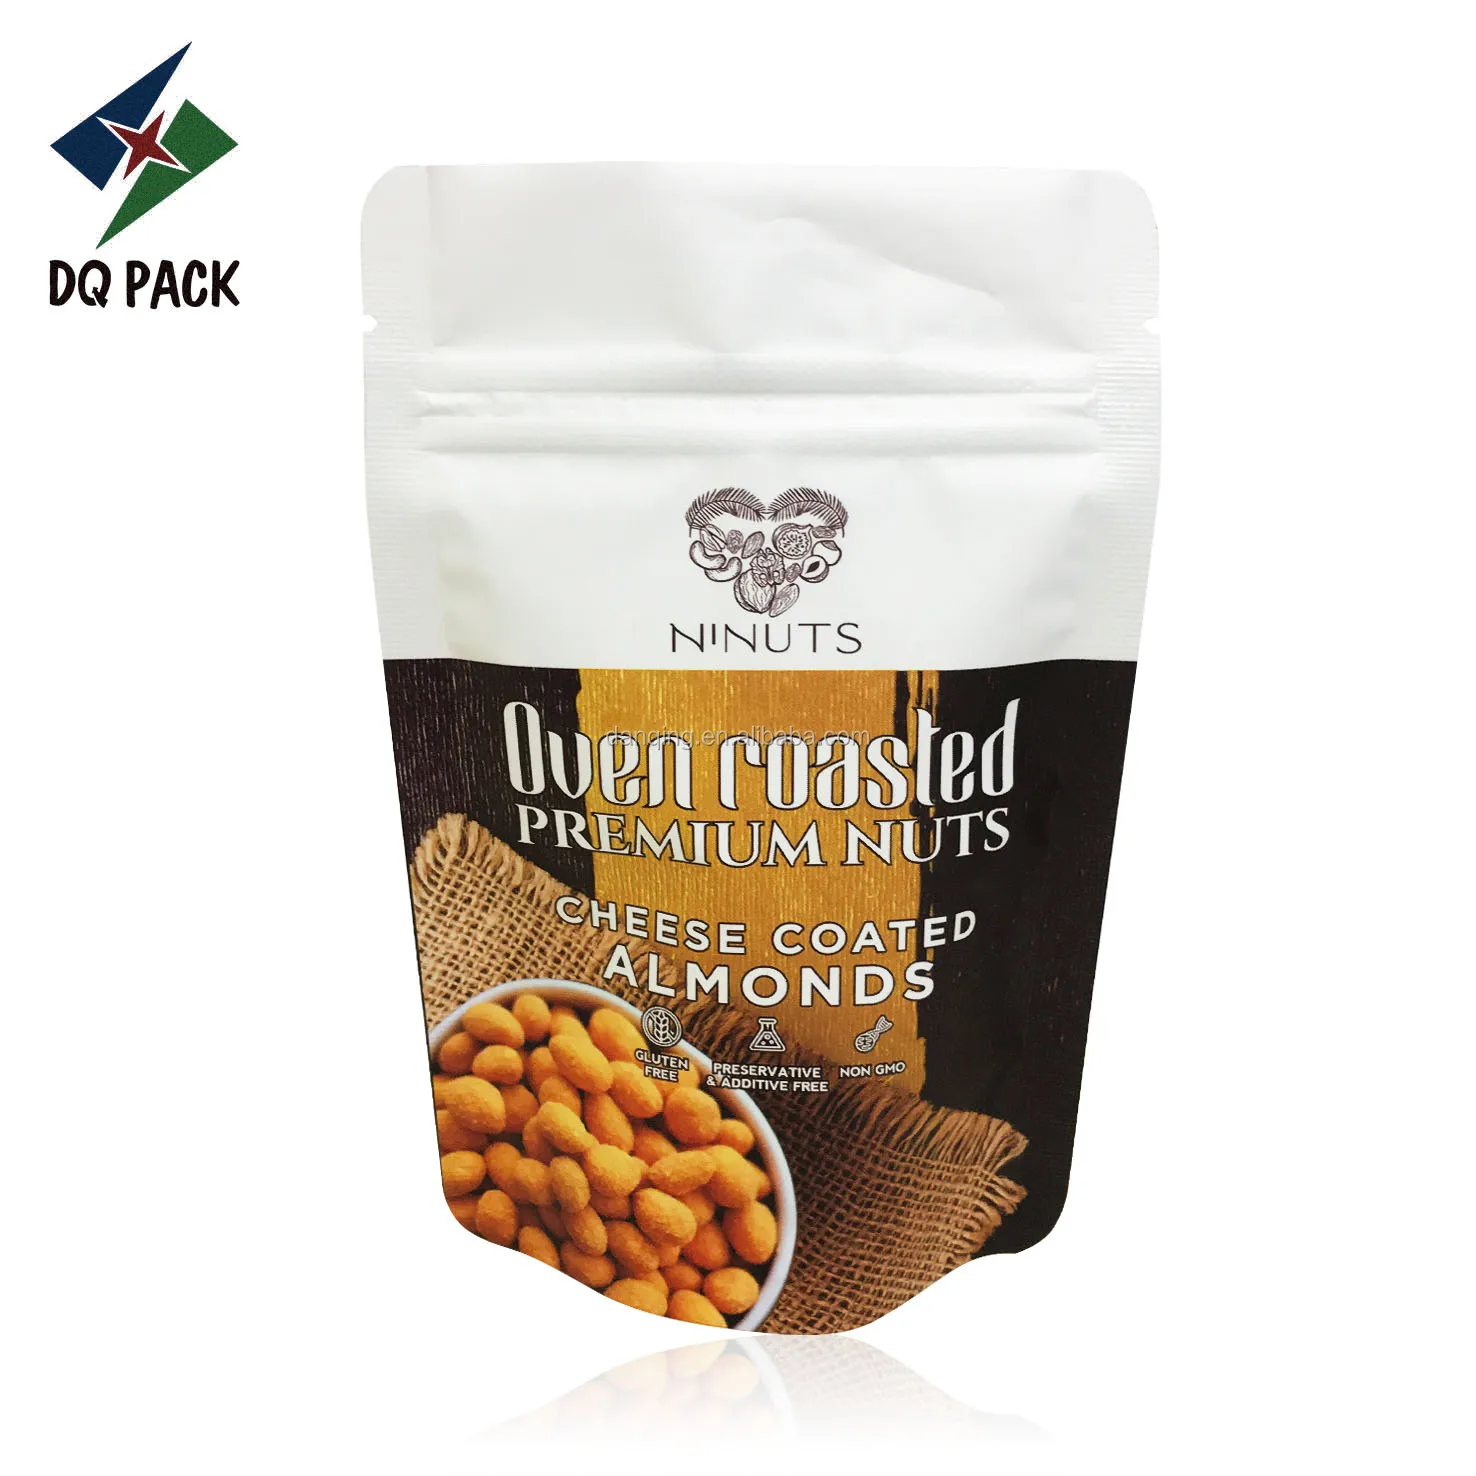 DQ PACK Food Grade Printed Bags For Packaging Nuts